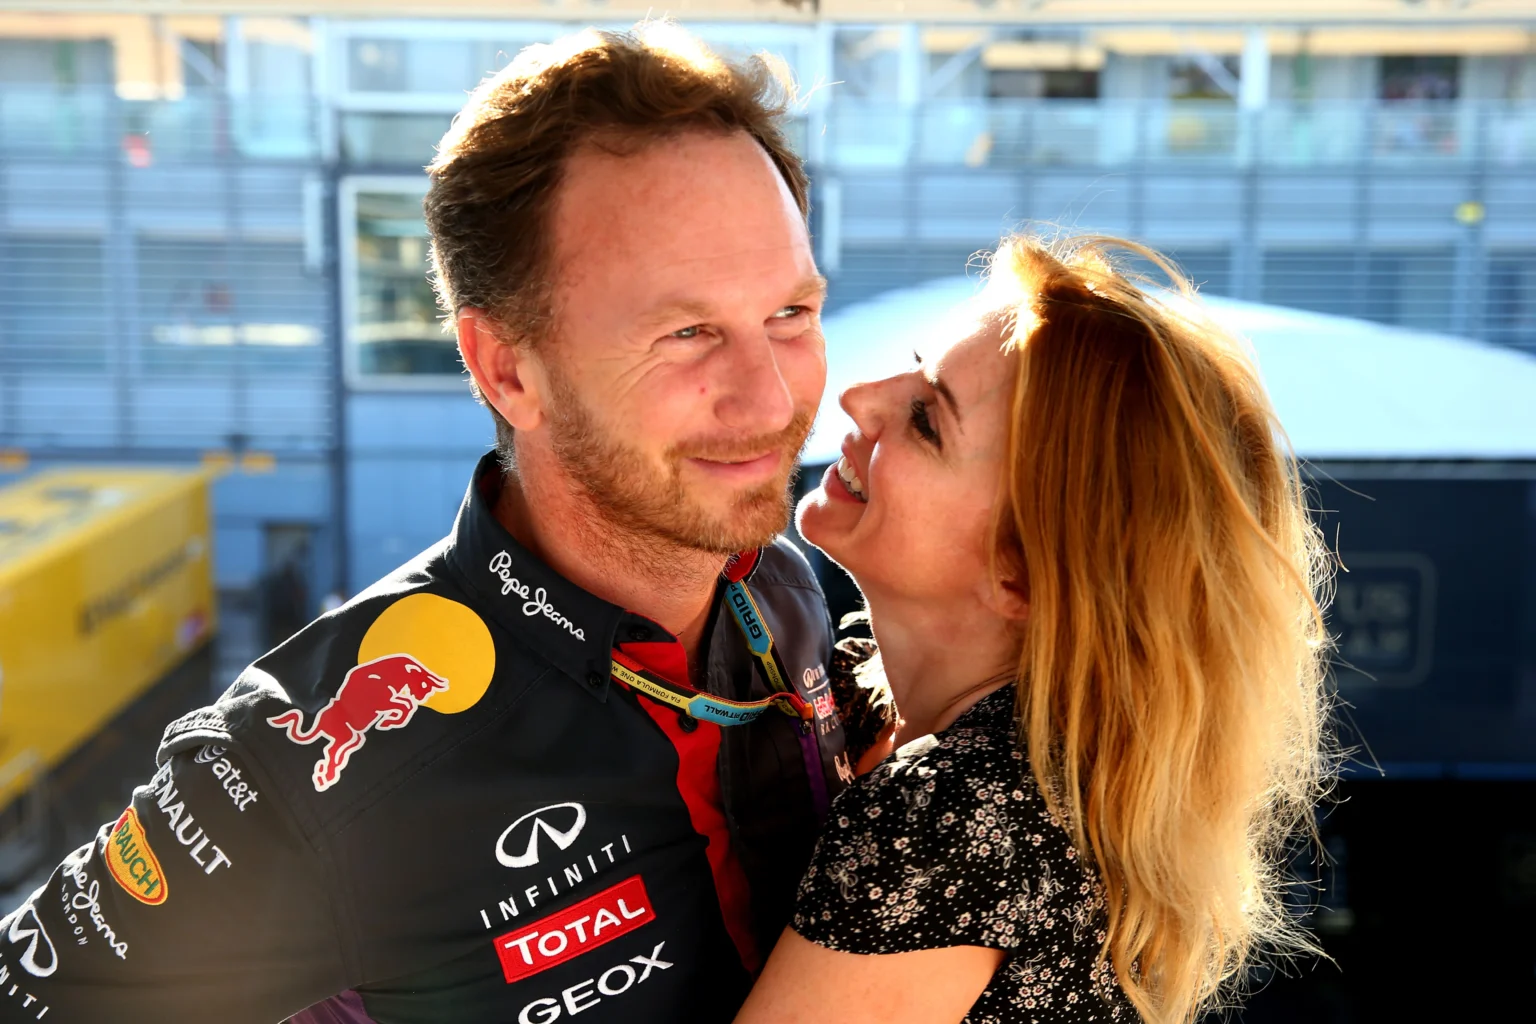 Details emerge of the allegations facing Geri Halliwell’s husband and Red Bull boss Christian Horner